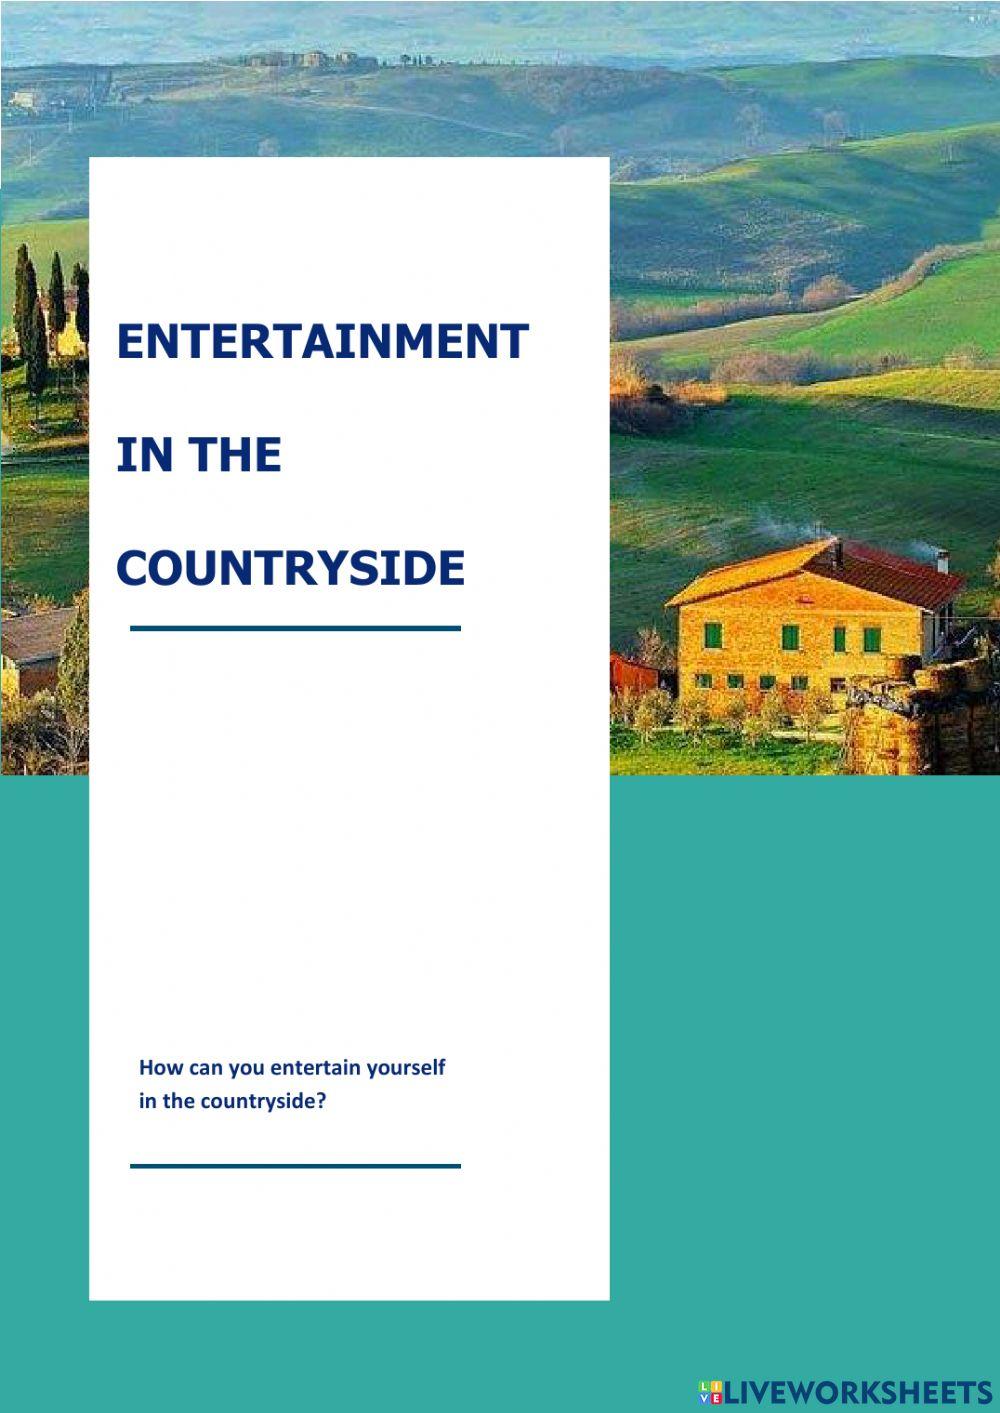 Entertainment in the city and in the countryside